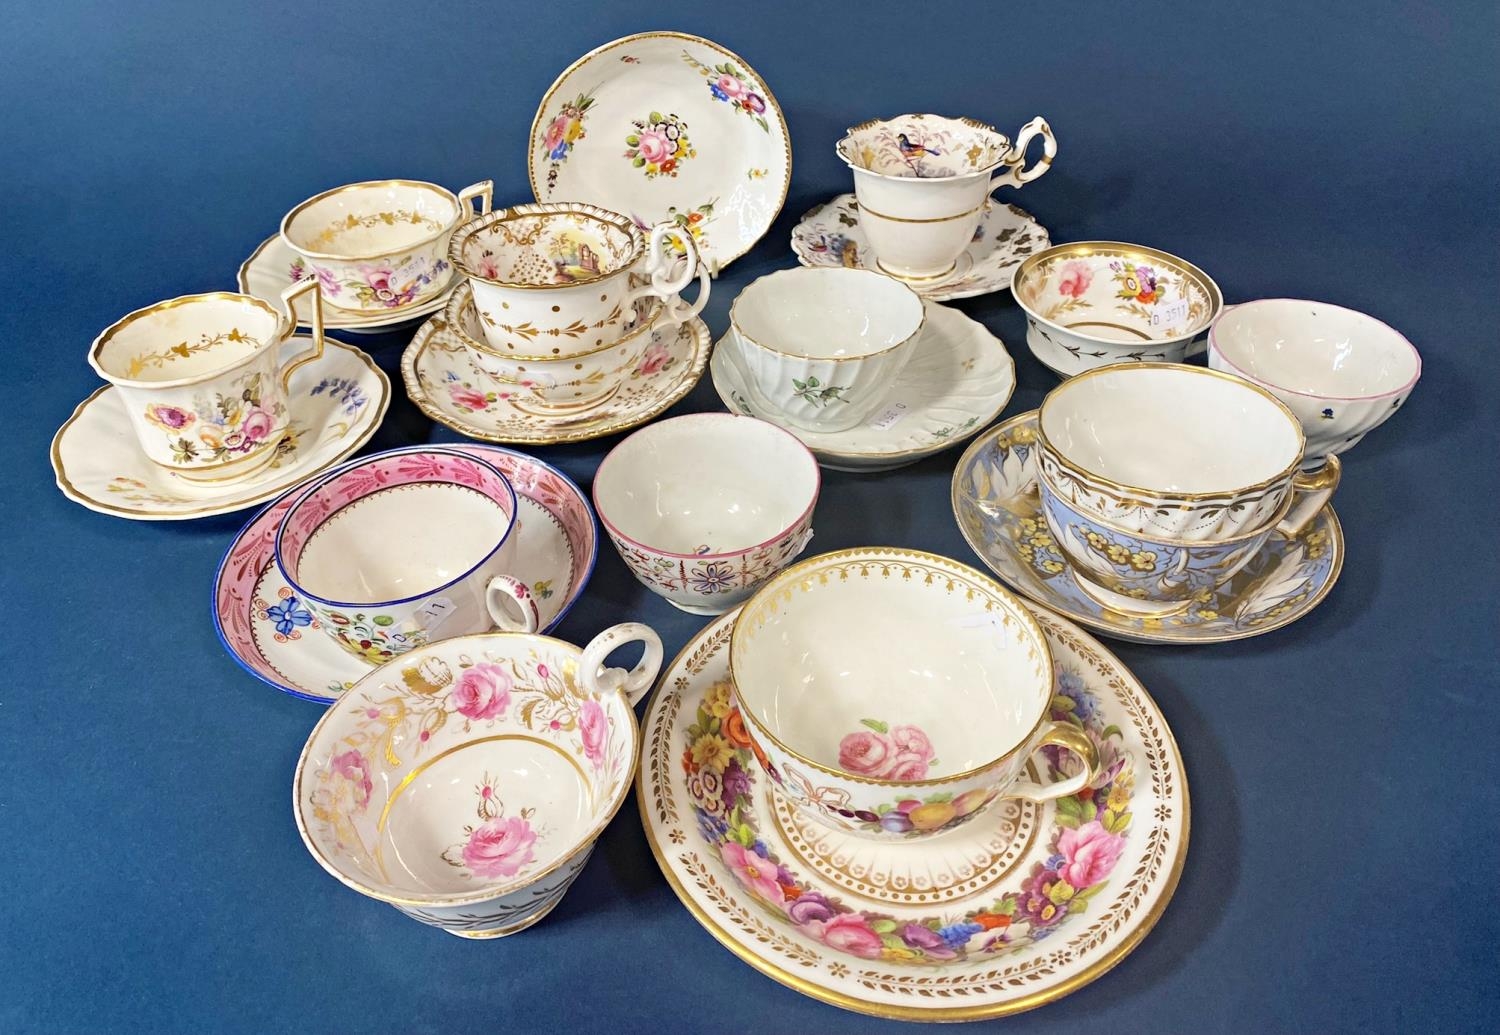 A collection of 18th & 19th century tea bowls and tea cups, many with saucers including examples